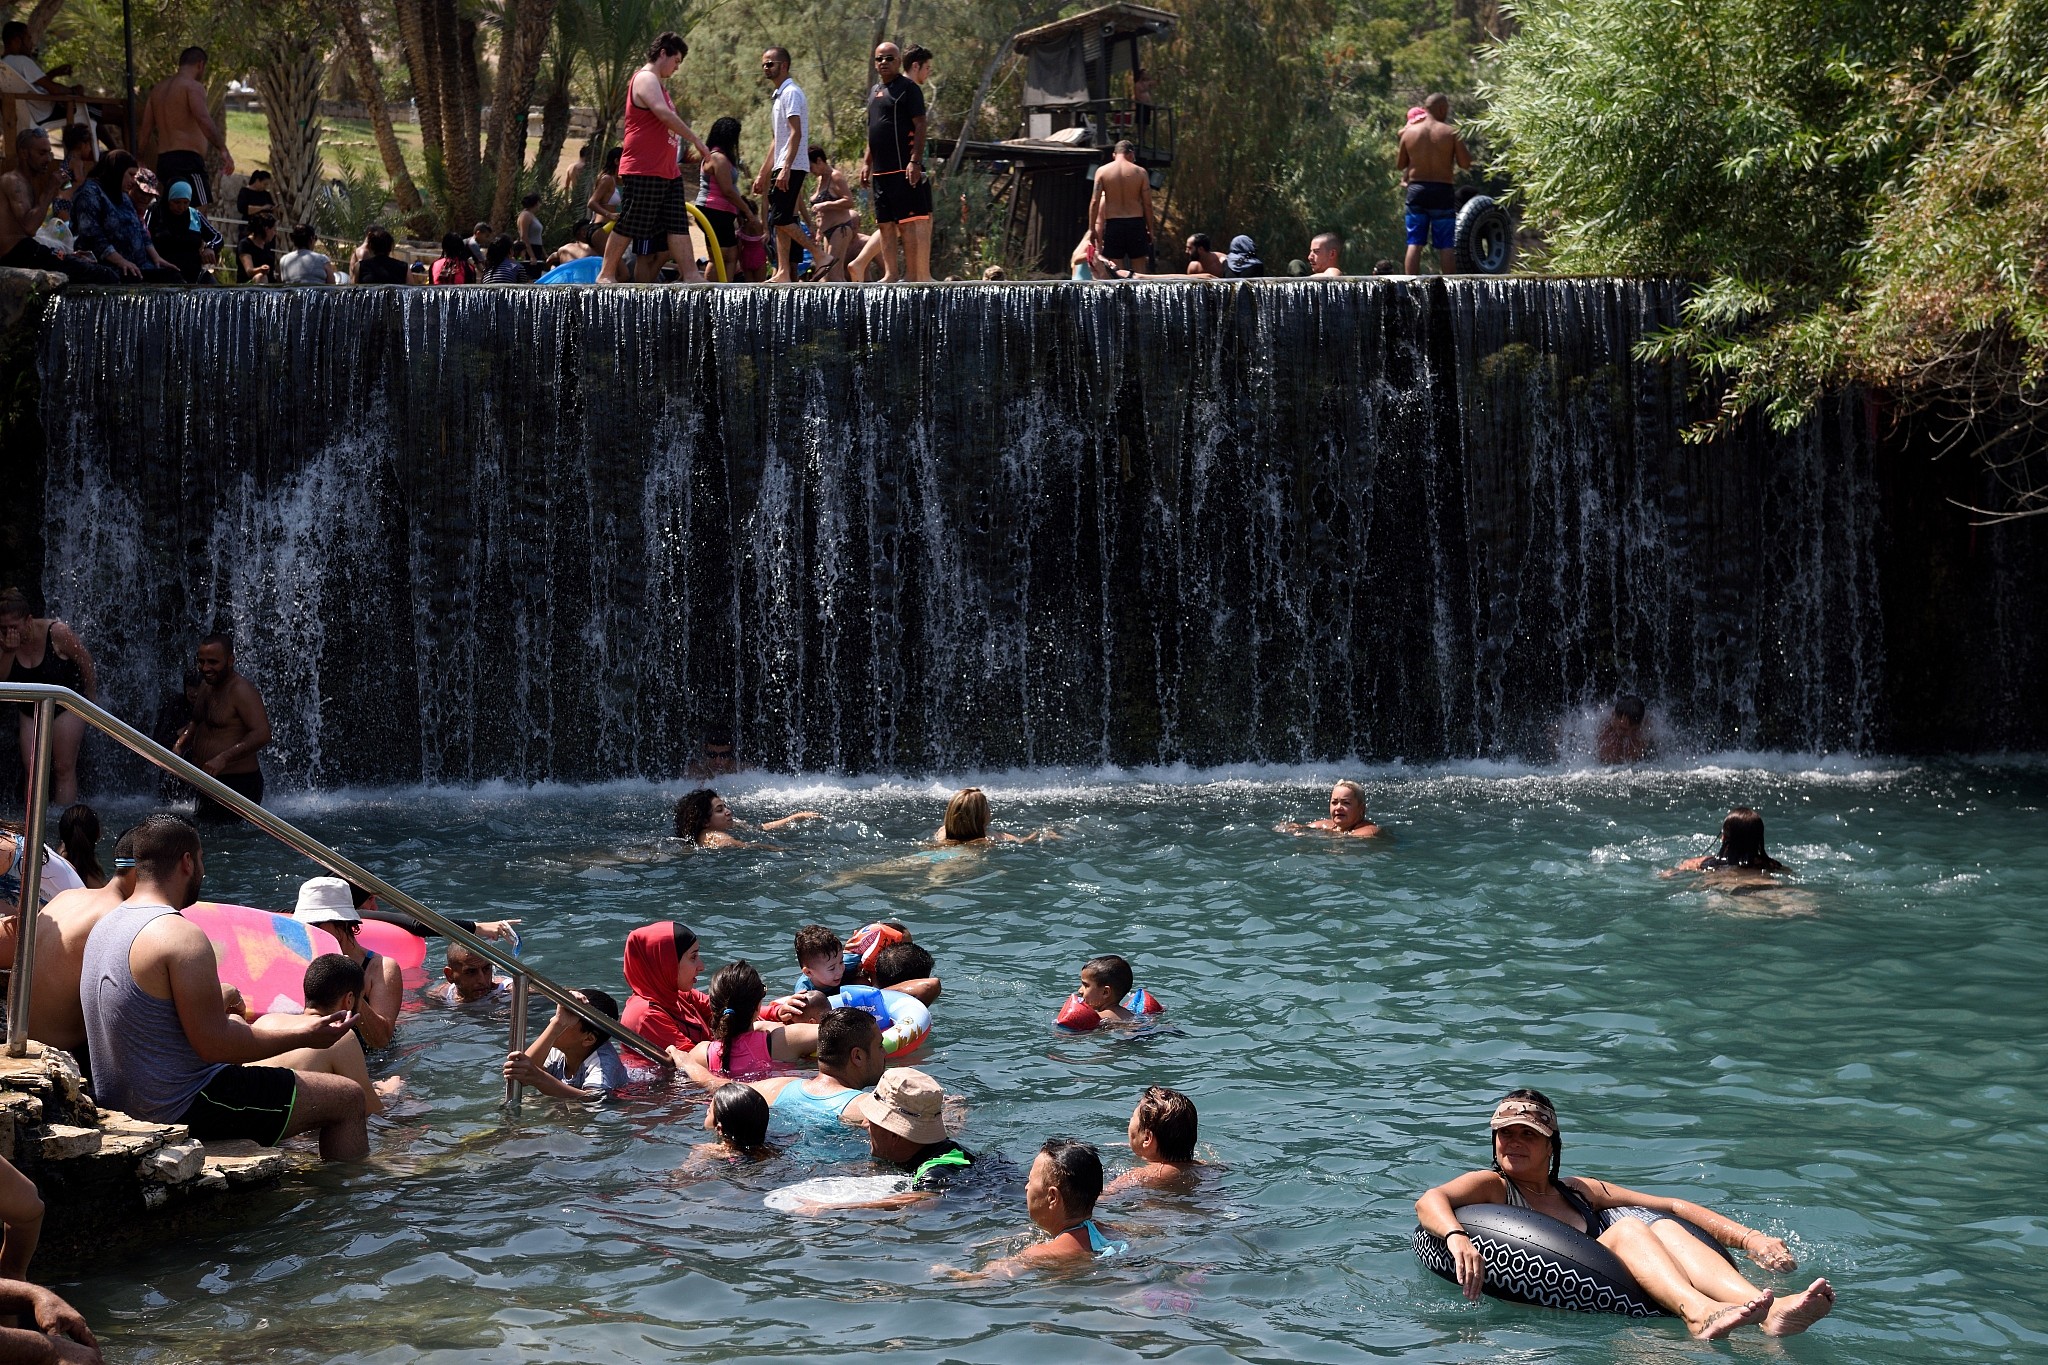 Fear and frustration run deep around sex-segregated swimming plan at natural springs The Times of Israel